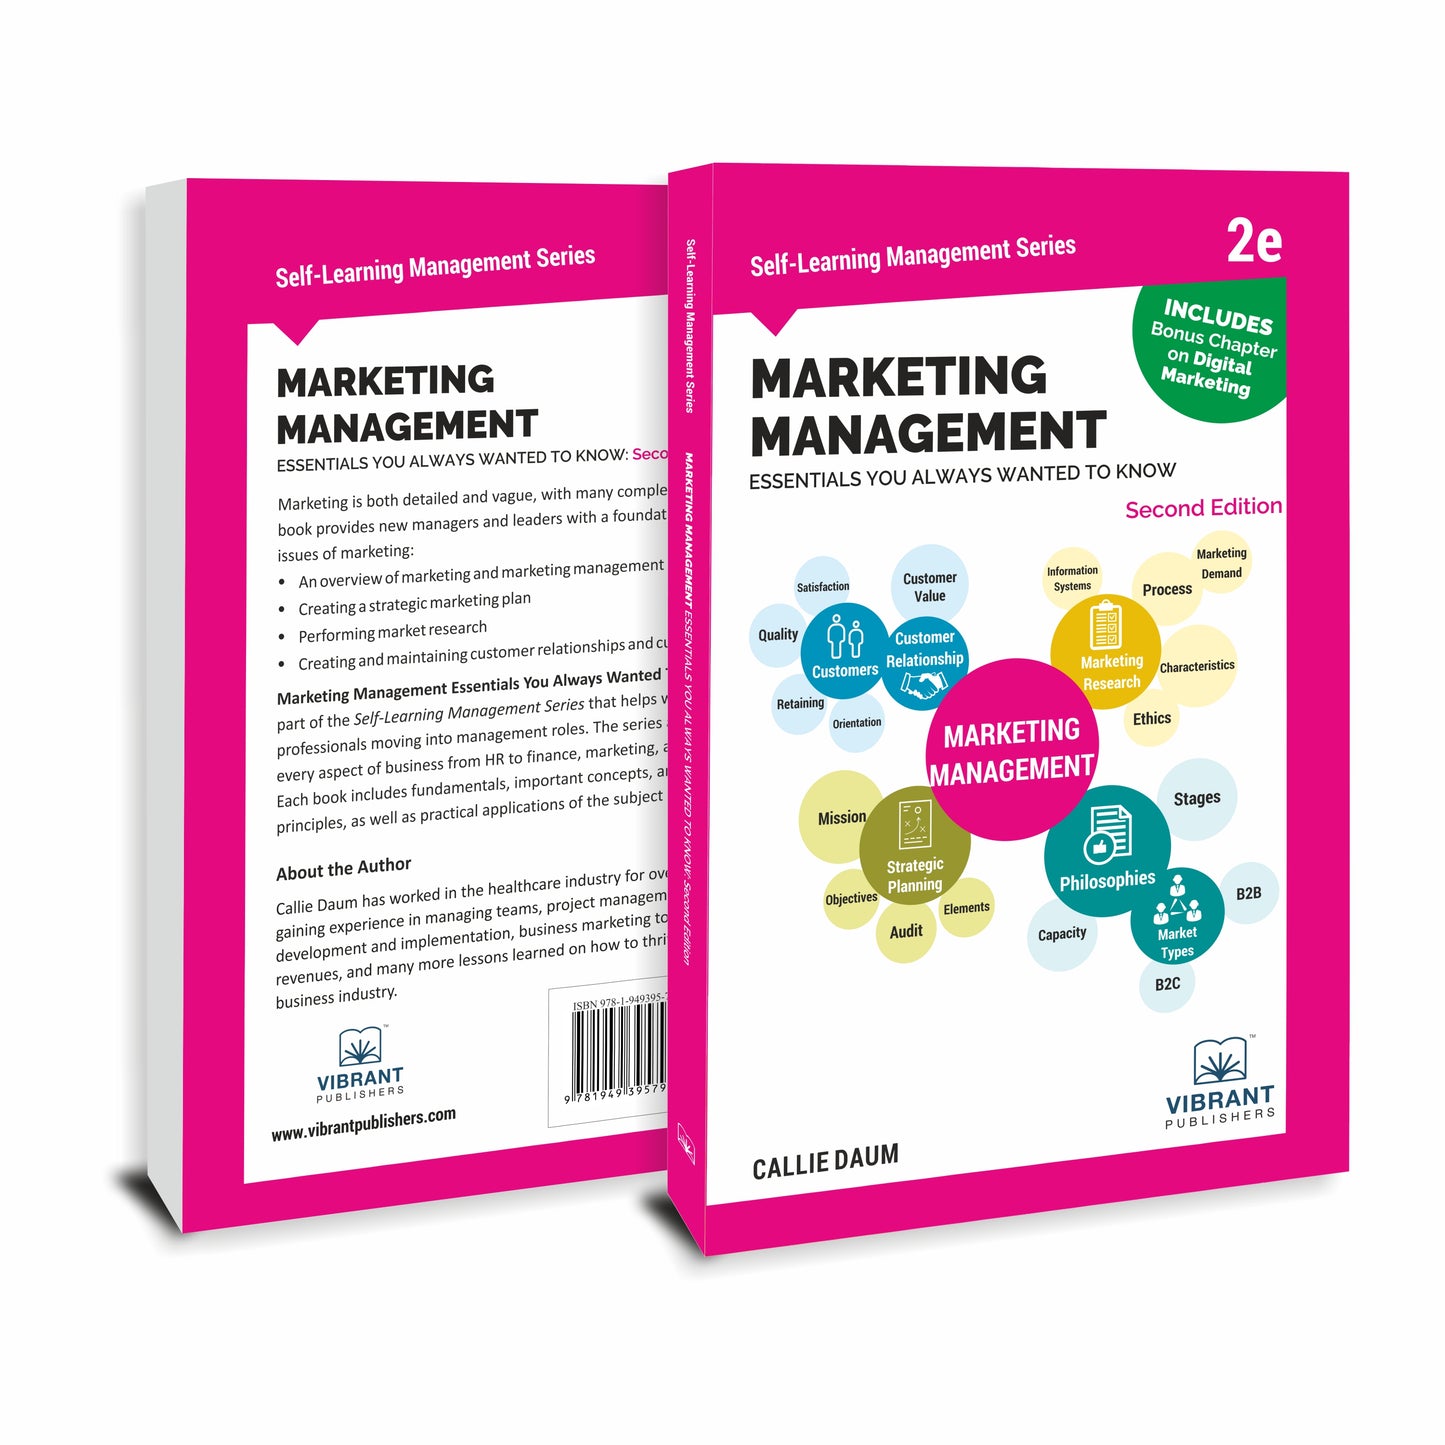 Marketing Management Essentials You Always Wanted To Know (2nd Edition)